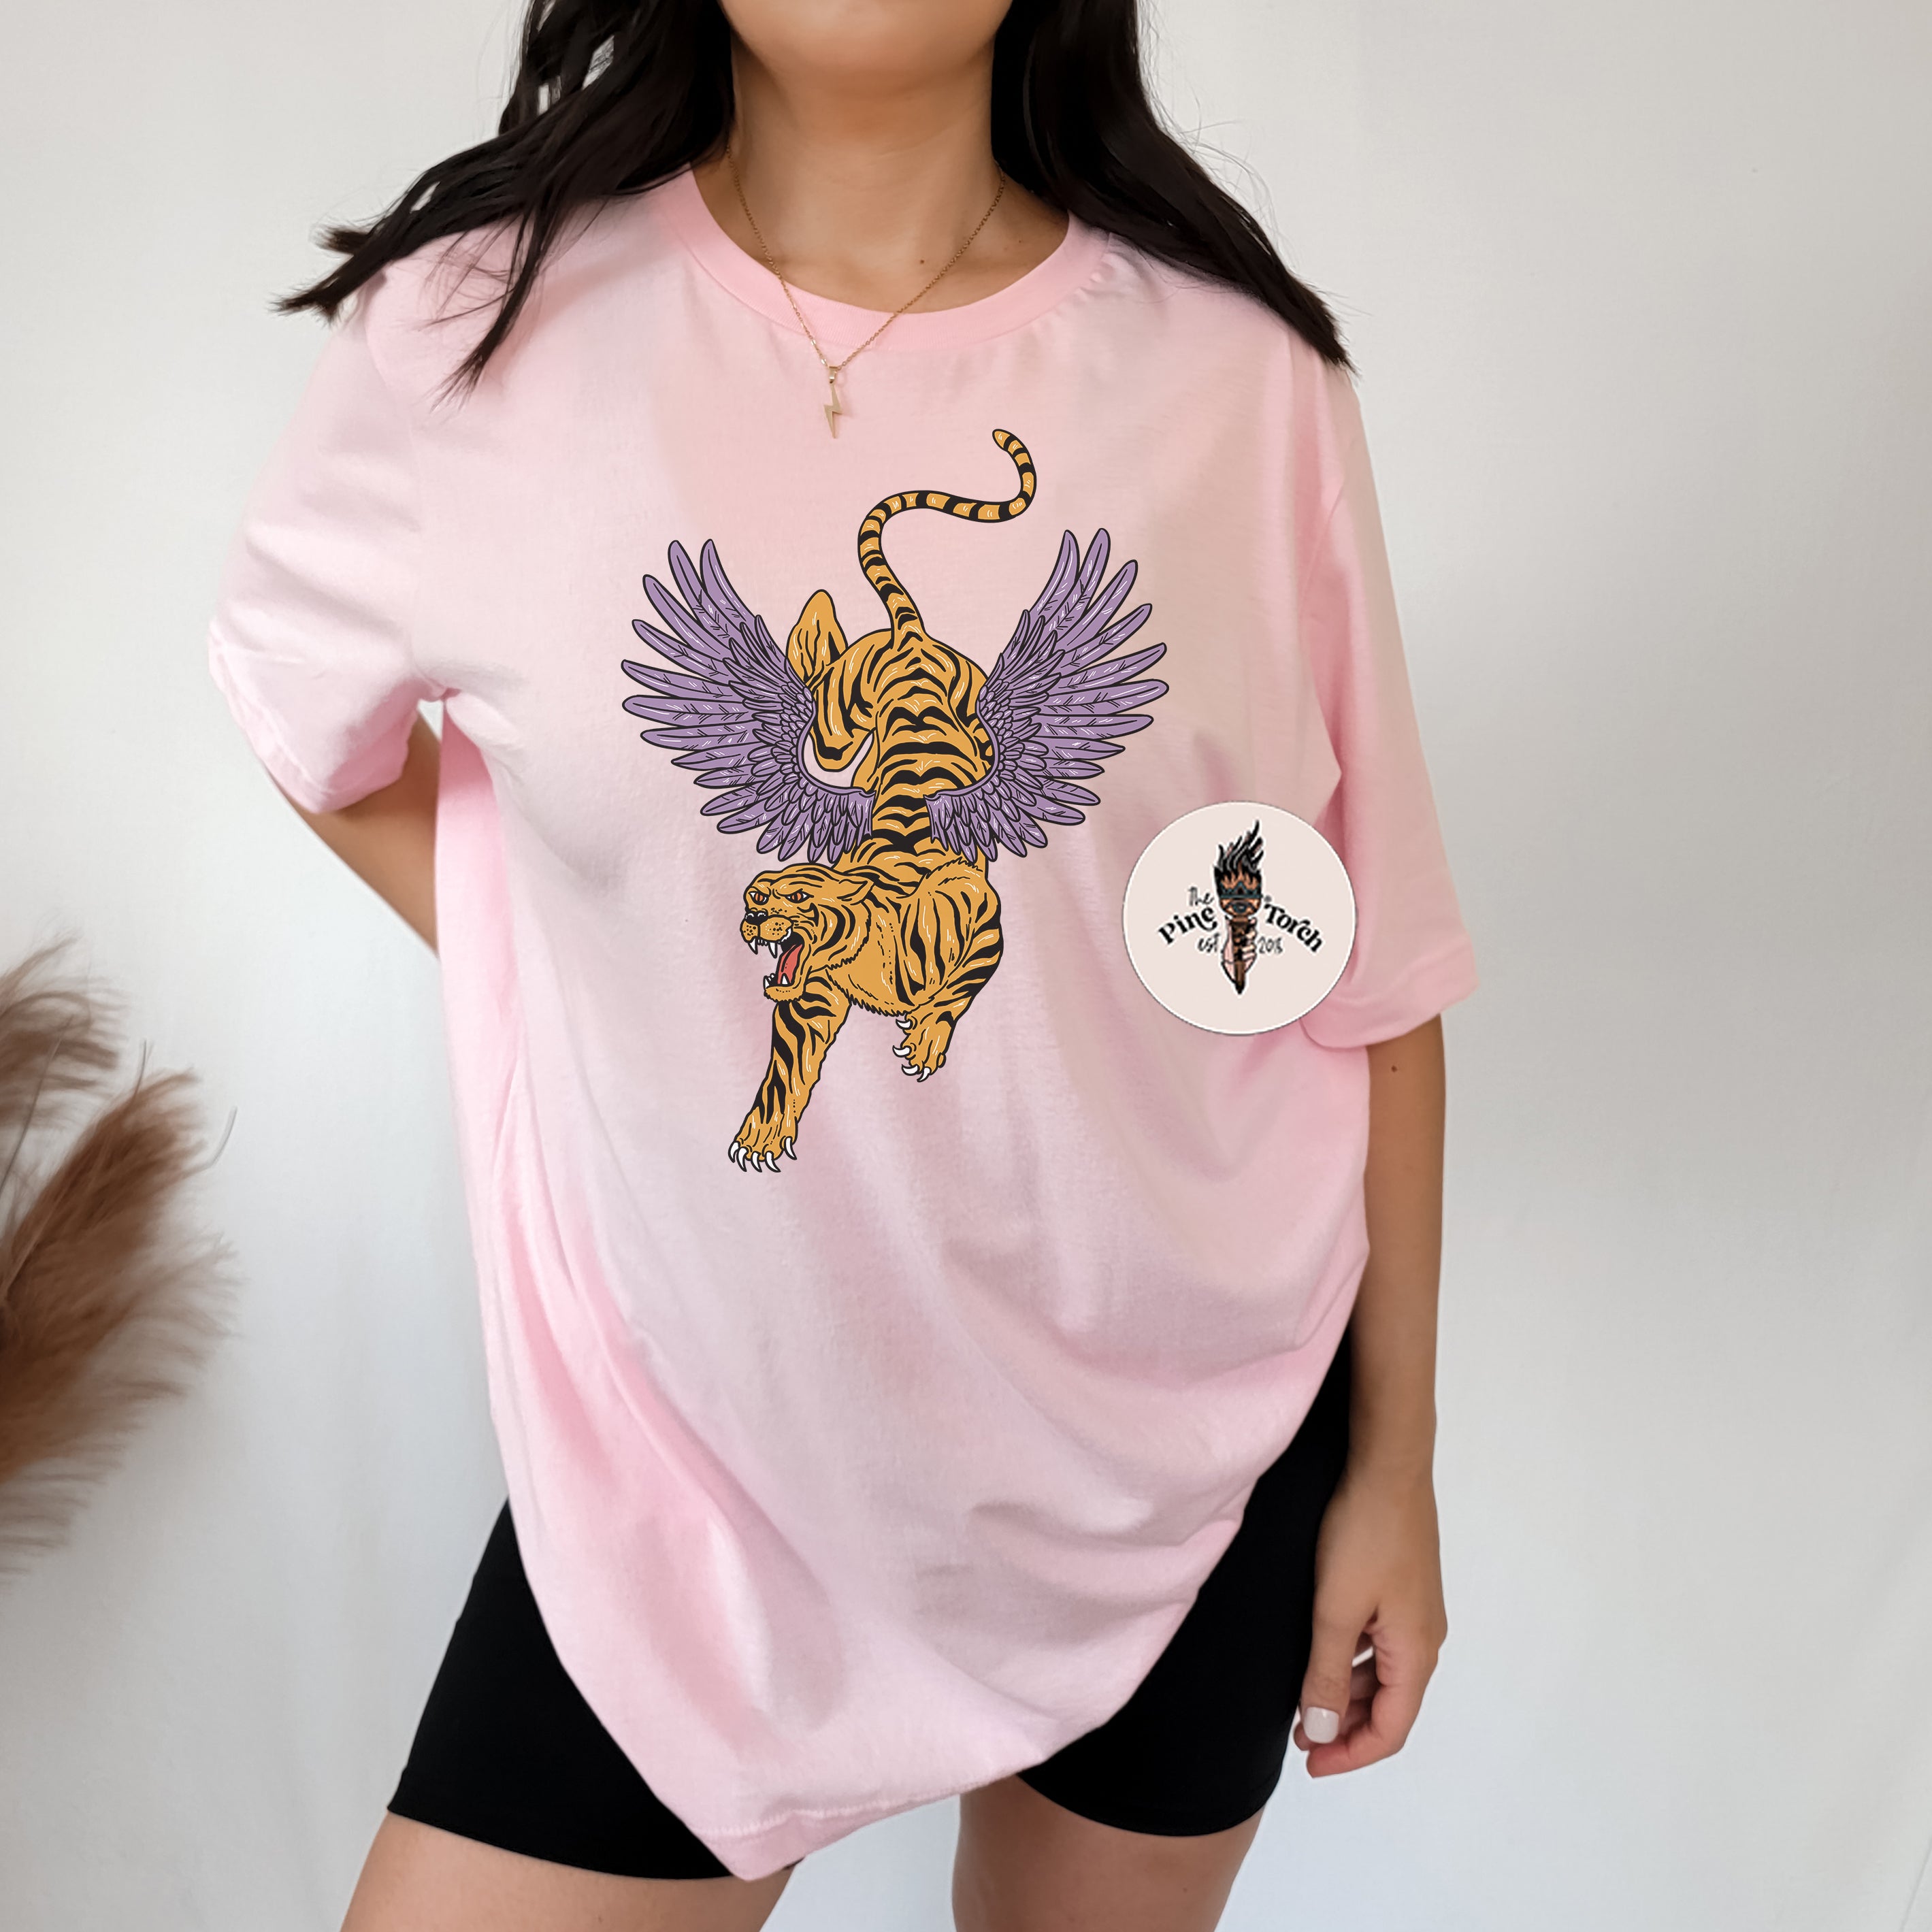 TIGER WITH WINGS // UNISEX TEE